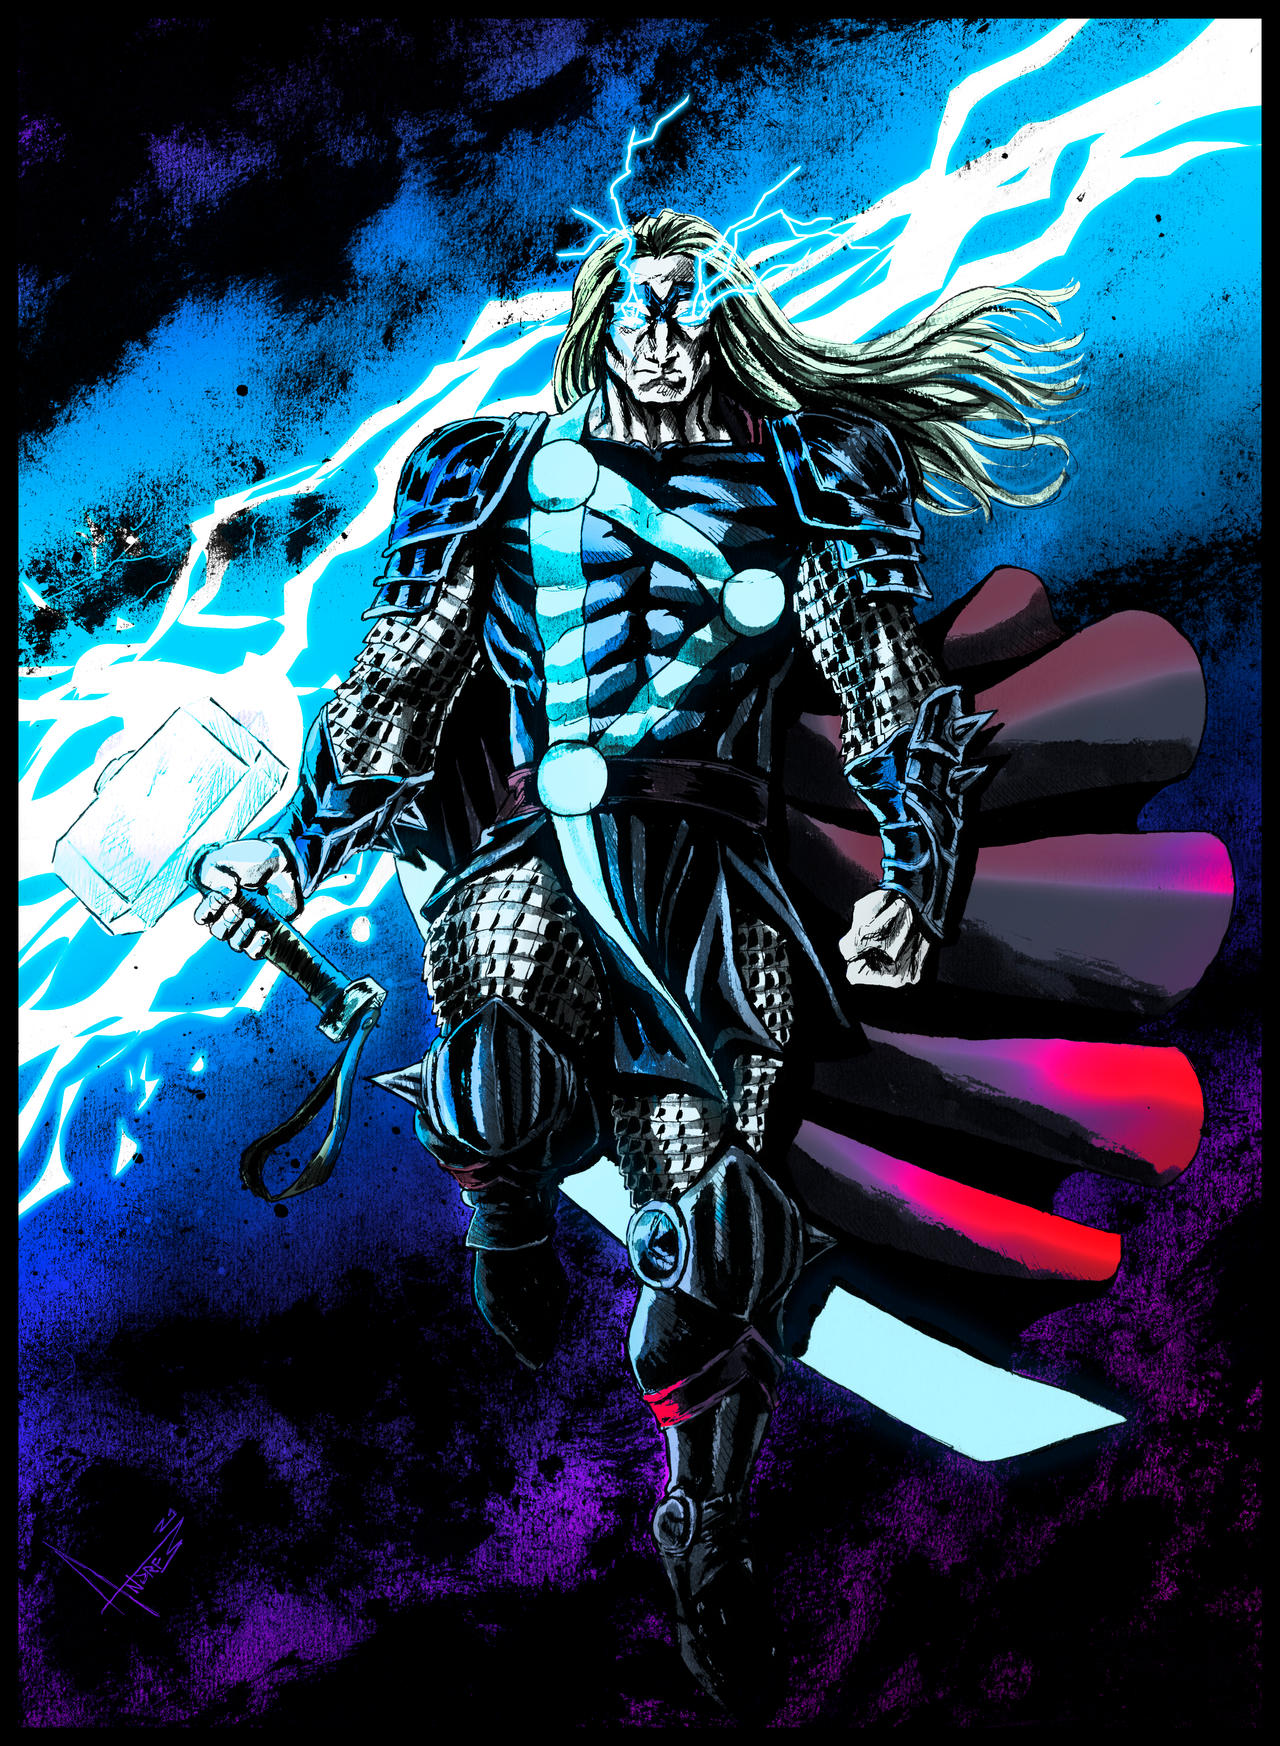 thor_herald_of_thunder_galactus_by_andres_concept_def7zq1-fullview.jpg